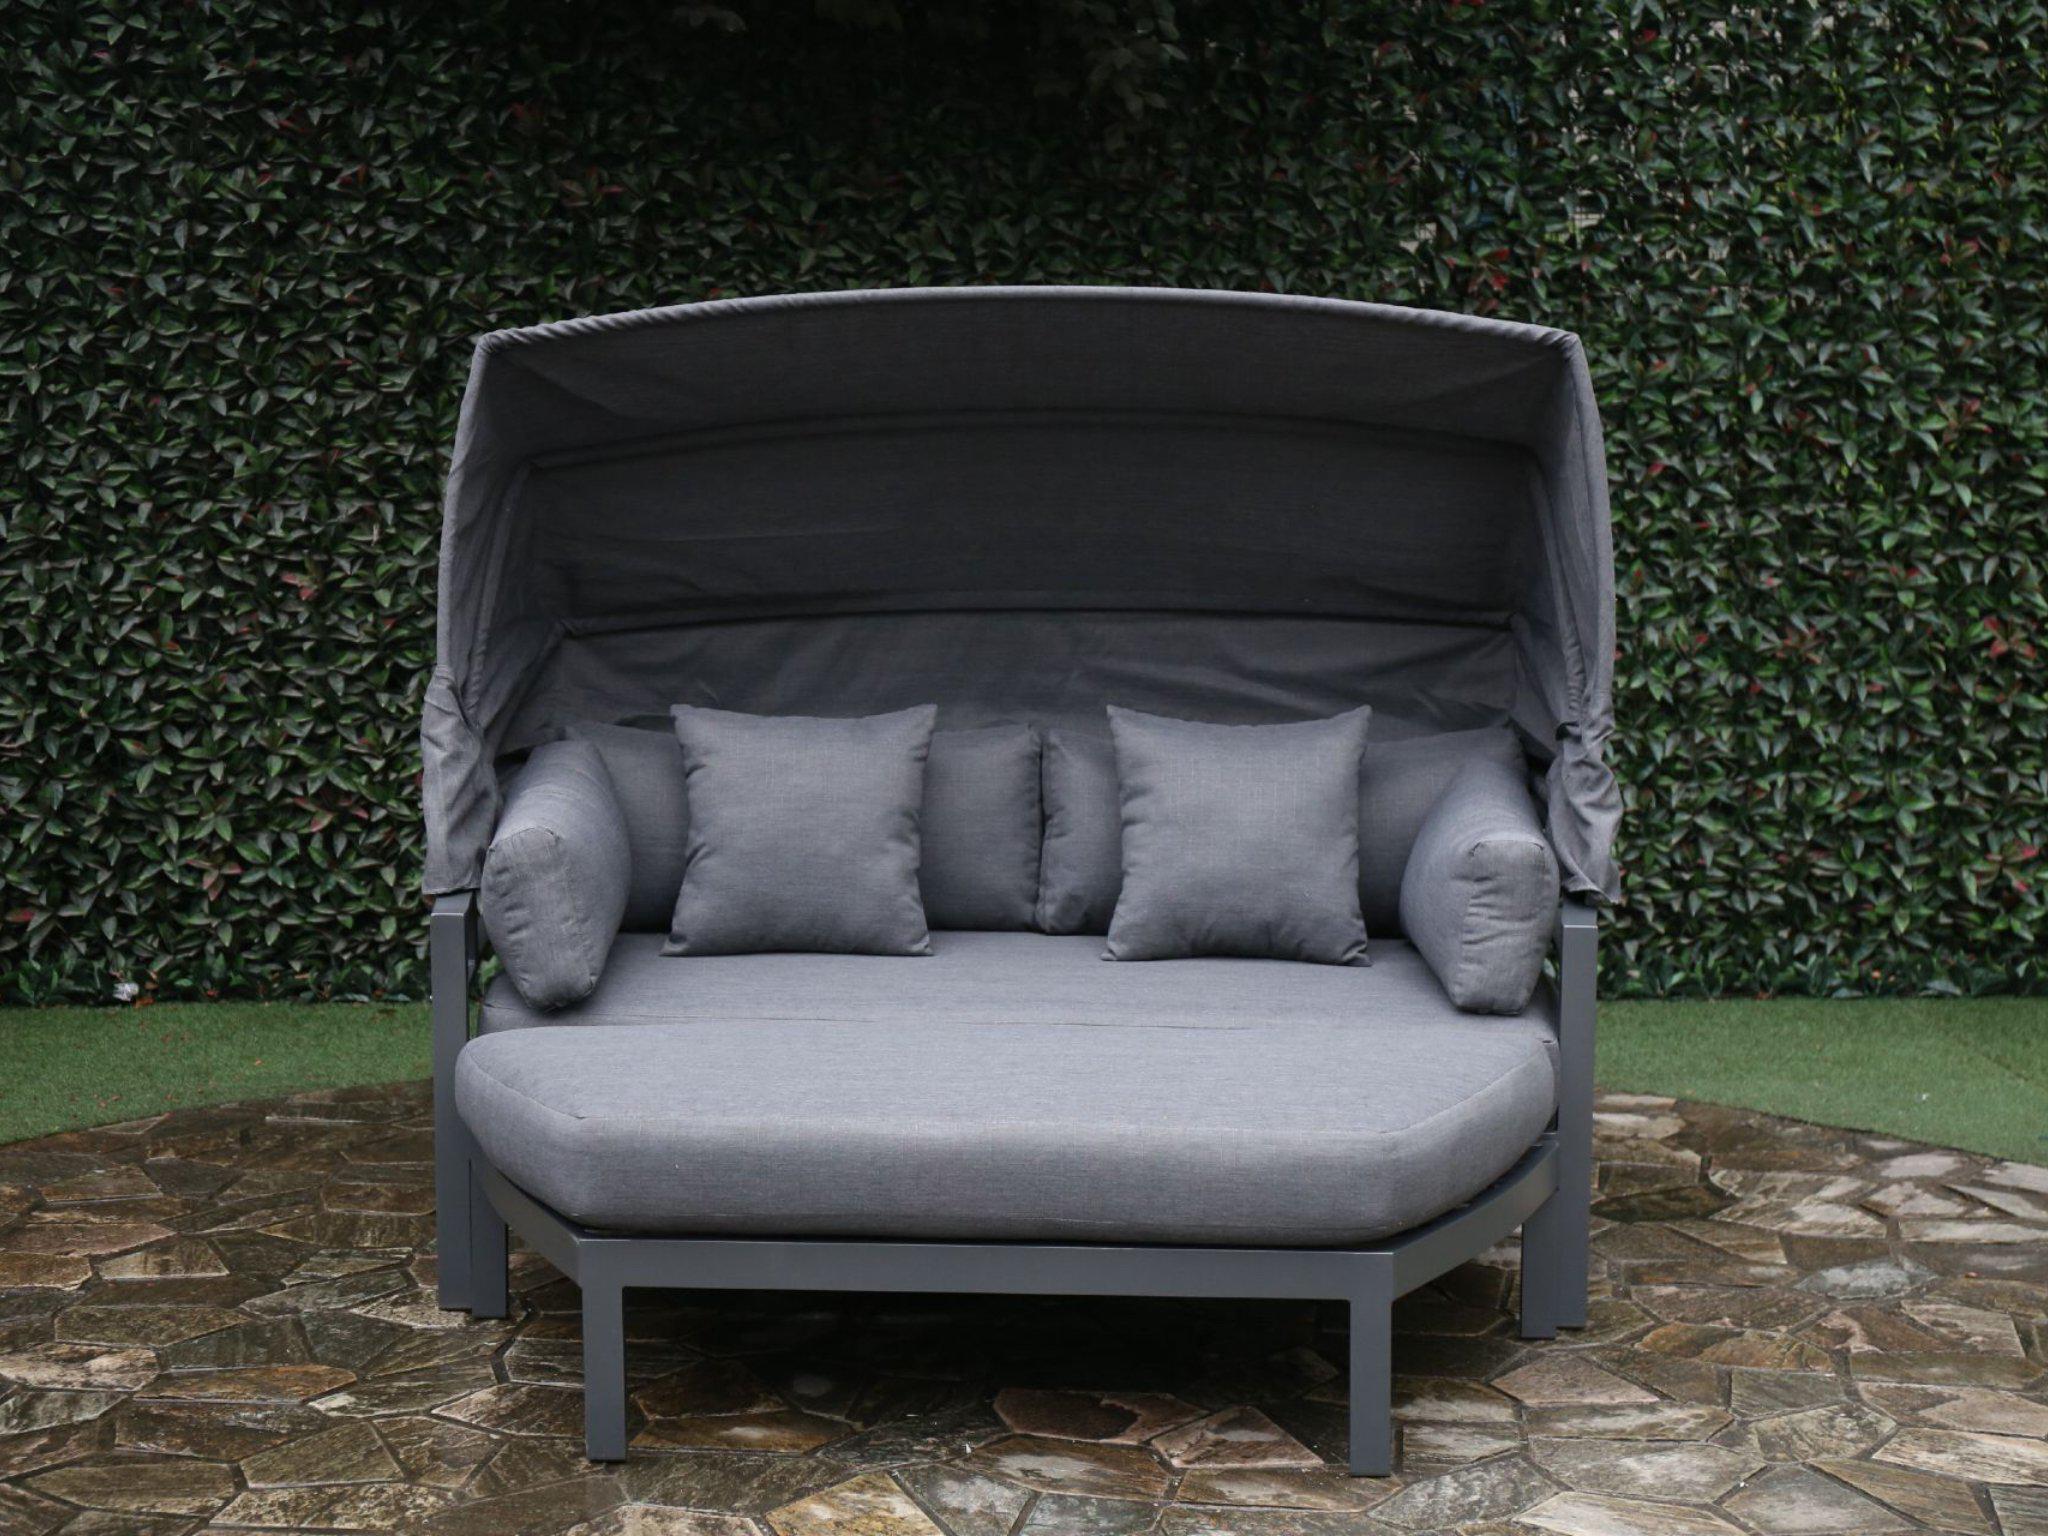 FurnitureOkay Manly Aluminium Outdoor Daybed — Charcoal